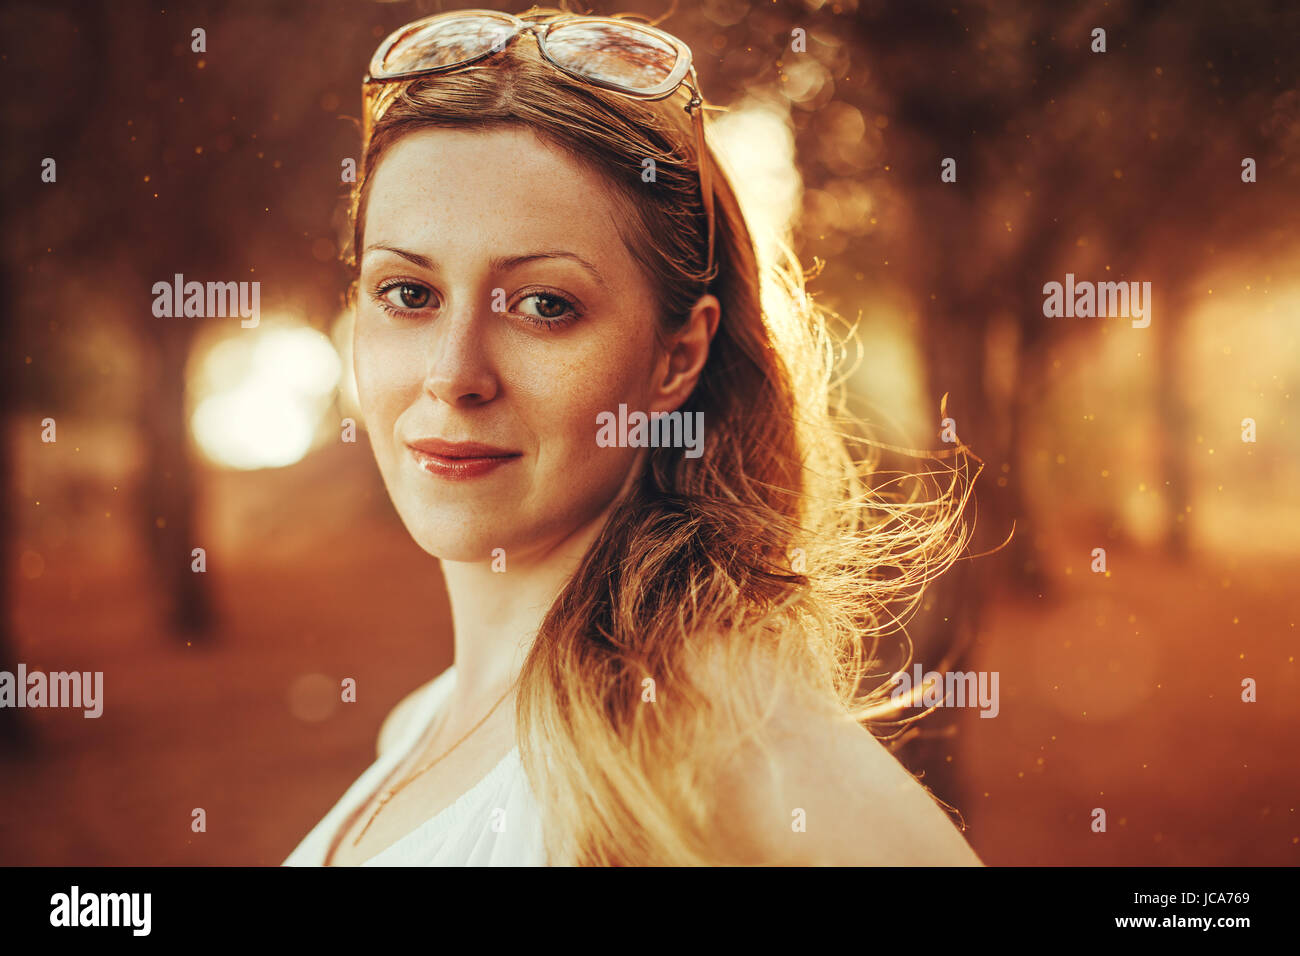 Young blond woman with sunglasses portrait at sunset light Stock Photo